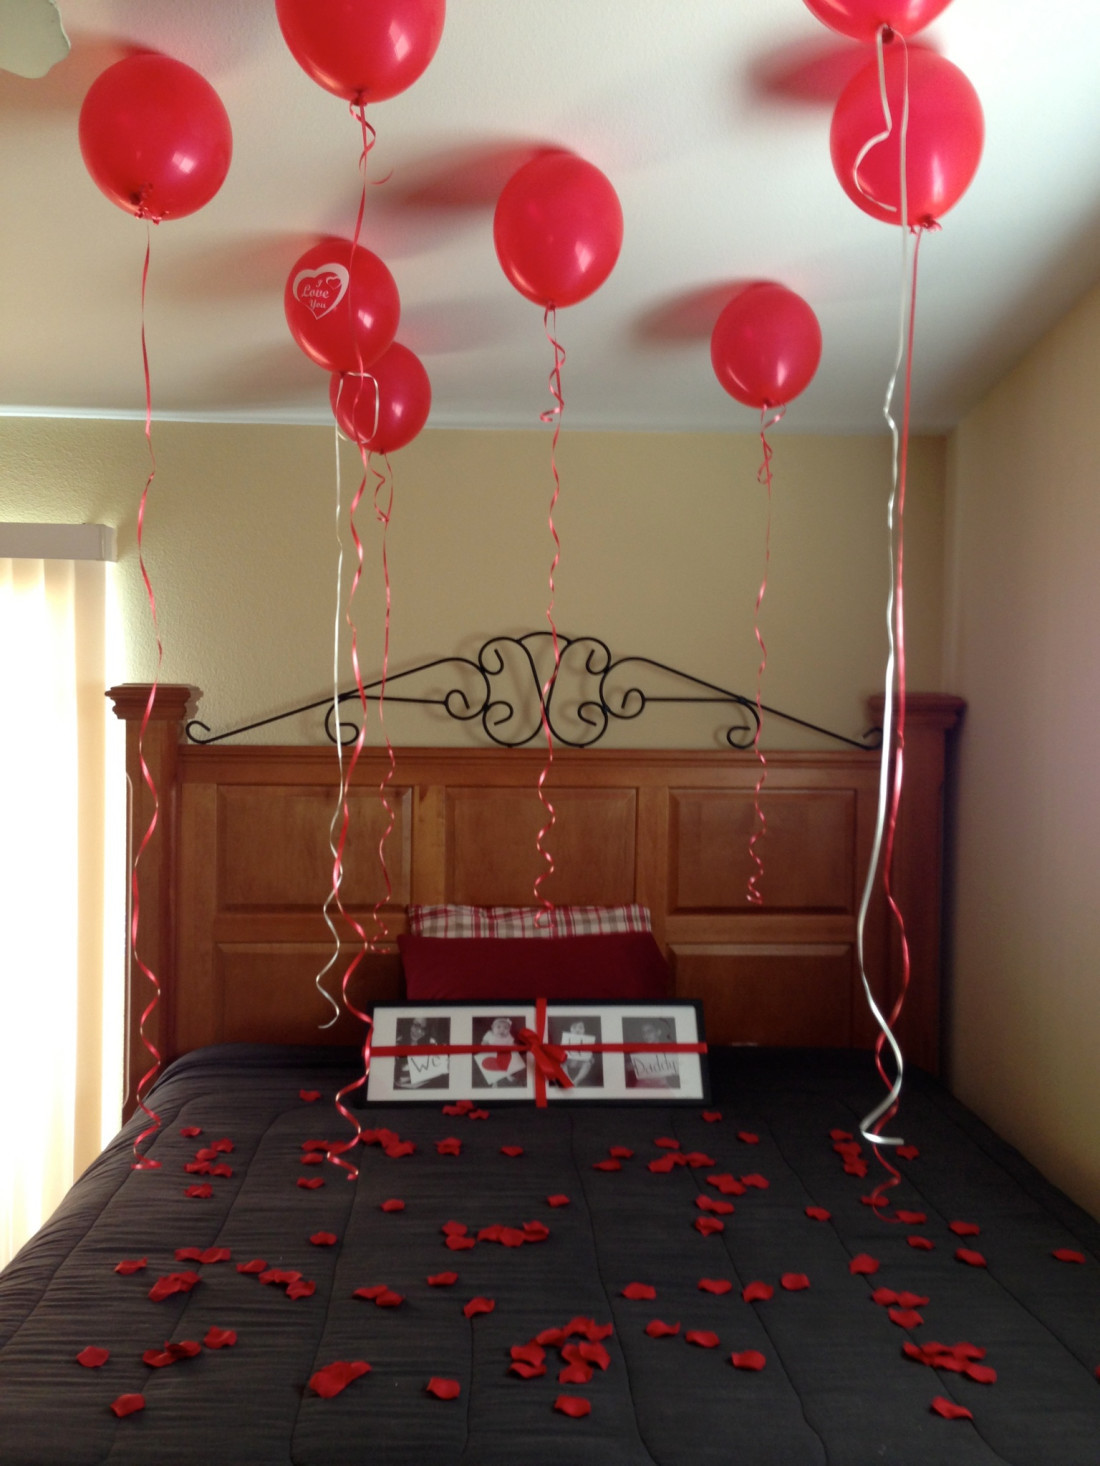 Valentines Day Ideas For Husband
 10 Creative Ways to Surprise Your Hubby for Valentine s